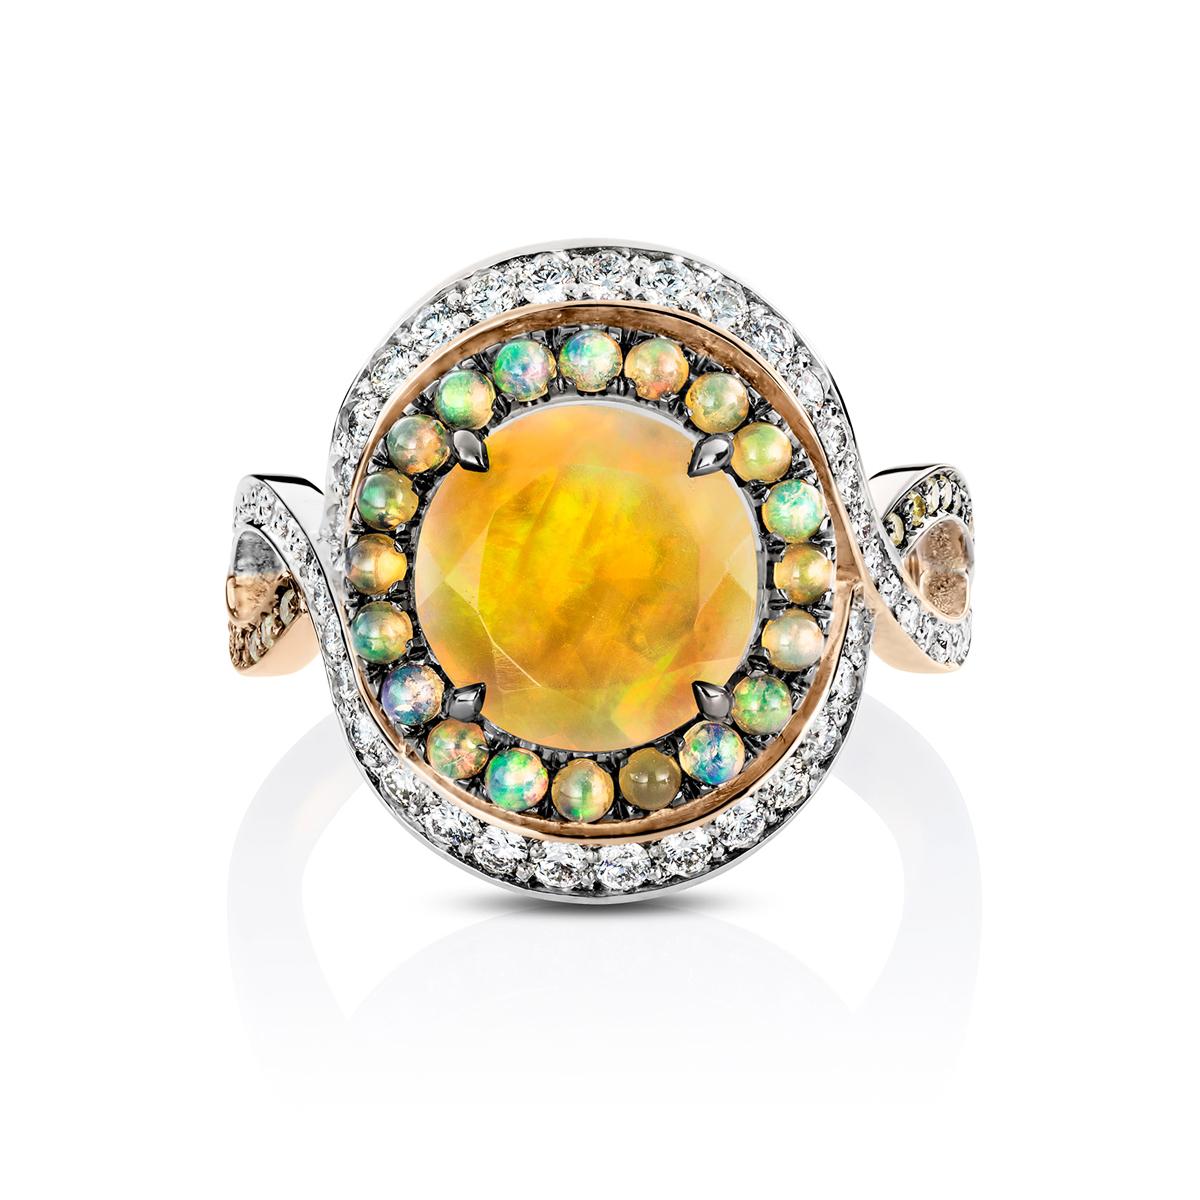 One of a kind ring in 18K Rose & White gold 6,4 g set with an Athiopien opal, Athiopian opal cabochons, white diamonds, natural yellow icy diamonds. Total carat diamonds: 0,66ct. Measurement of the centerstone with surounding stones 17,46 x 14 mm.